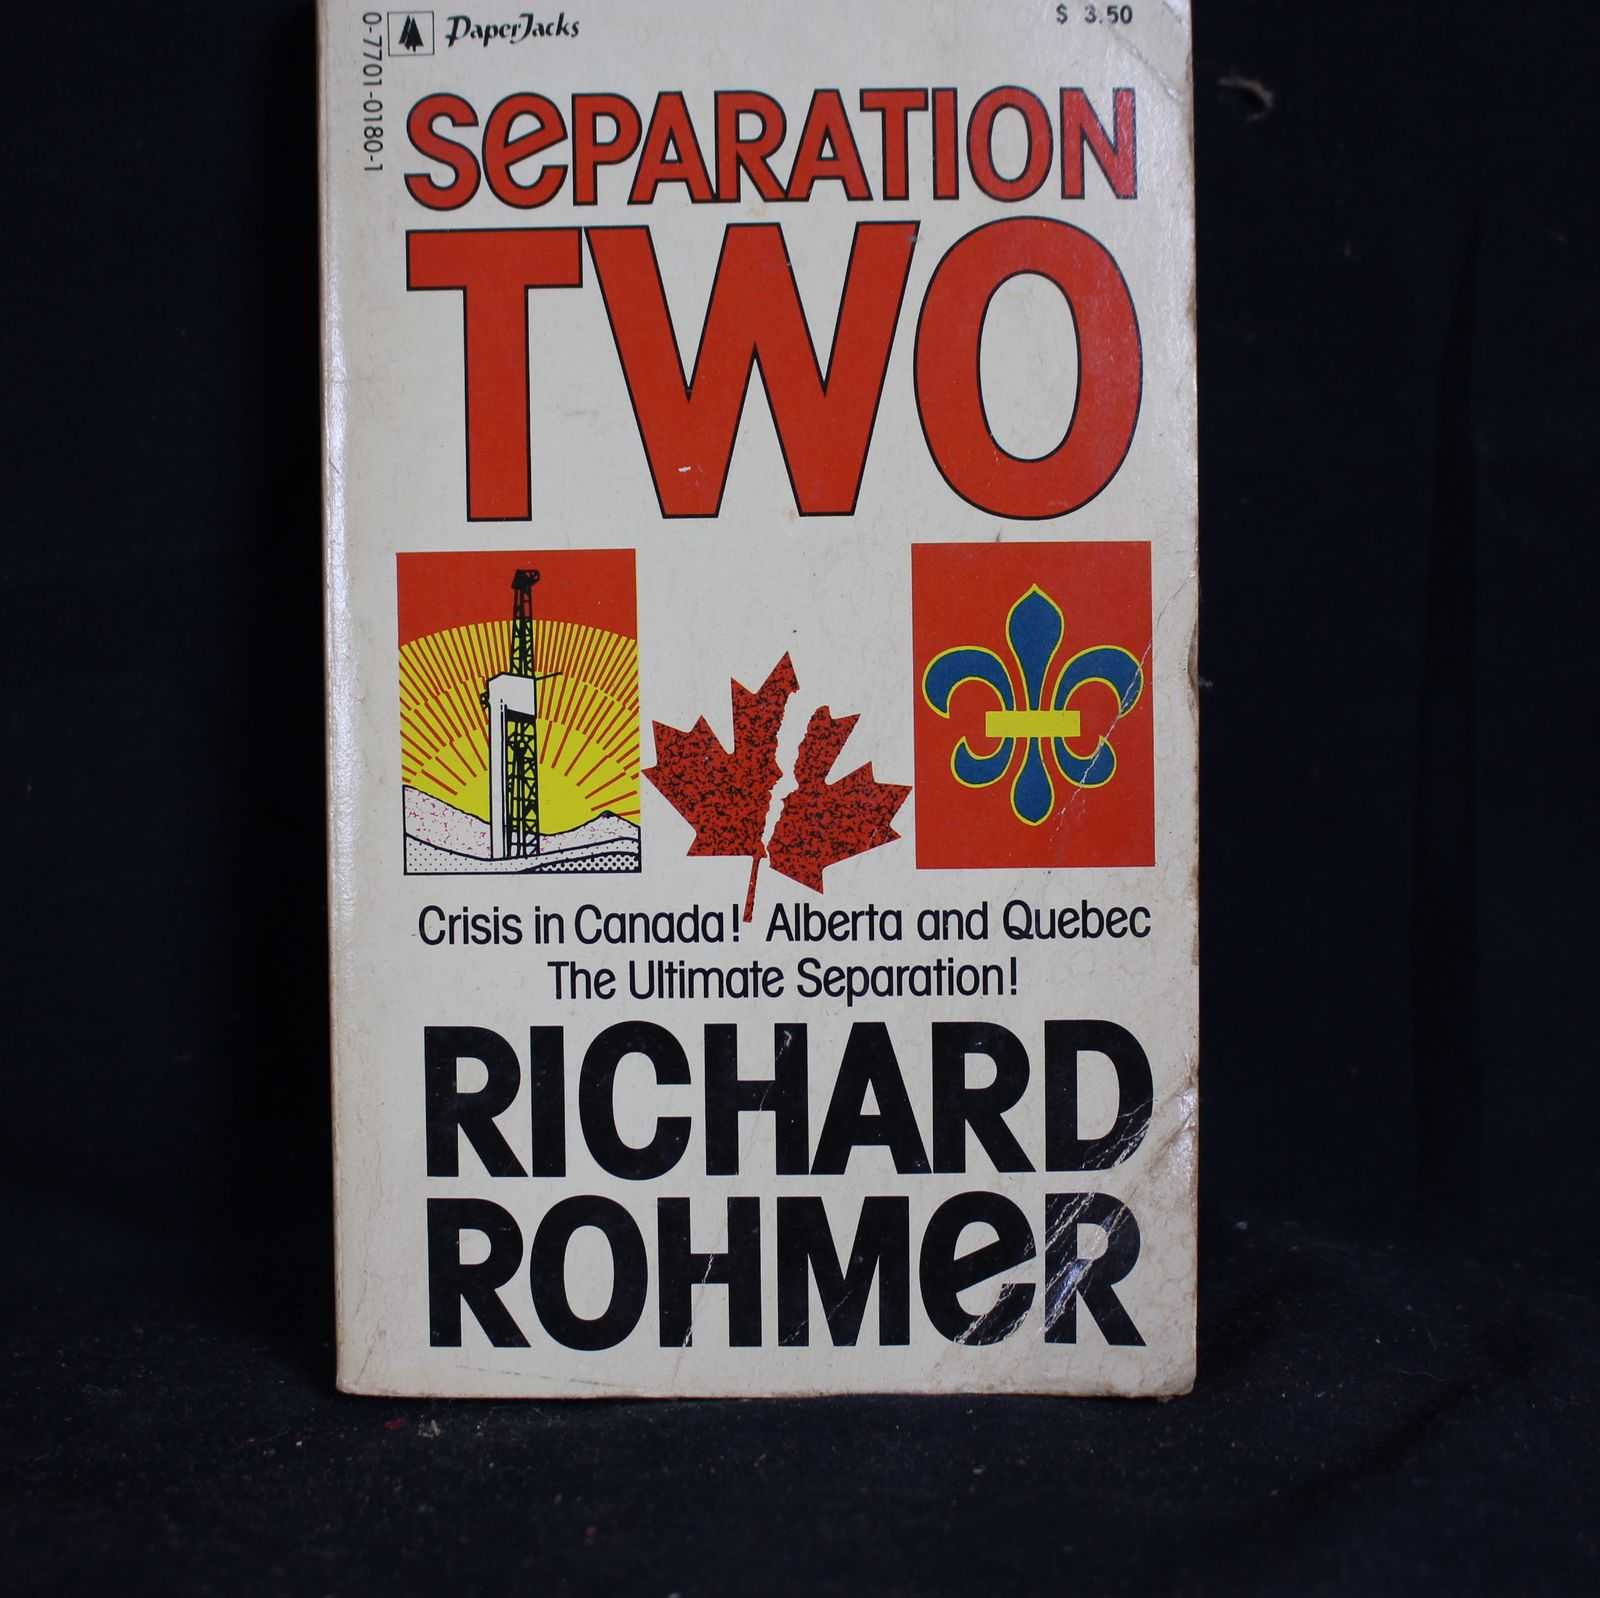 Separation Two by Richard Rohmer, 1981